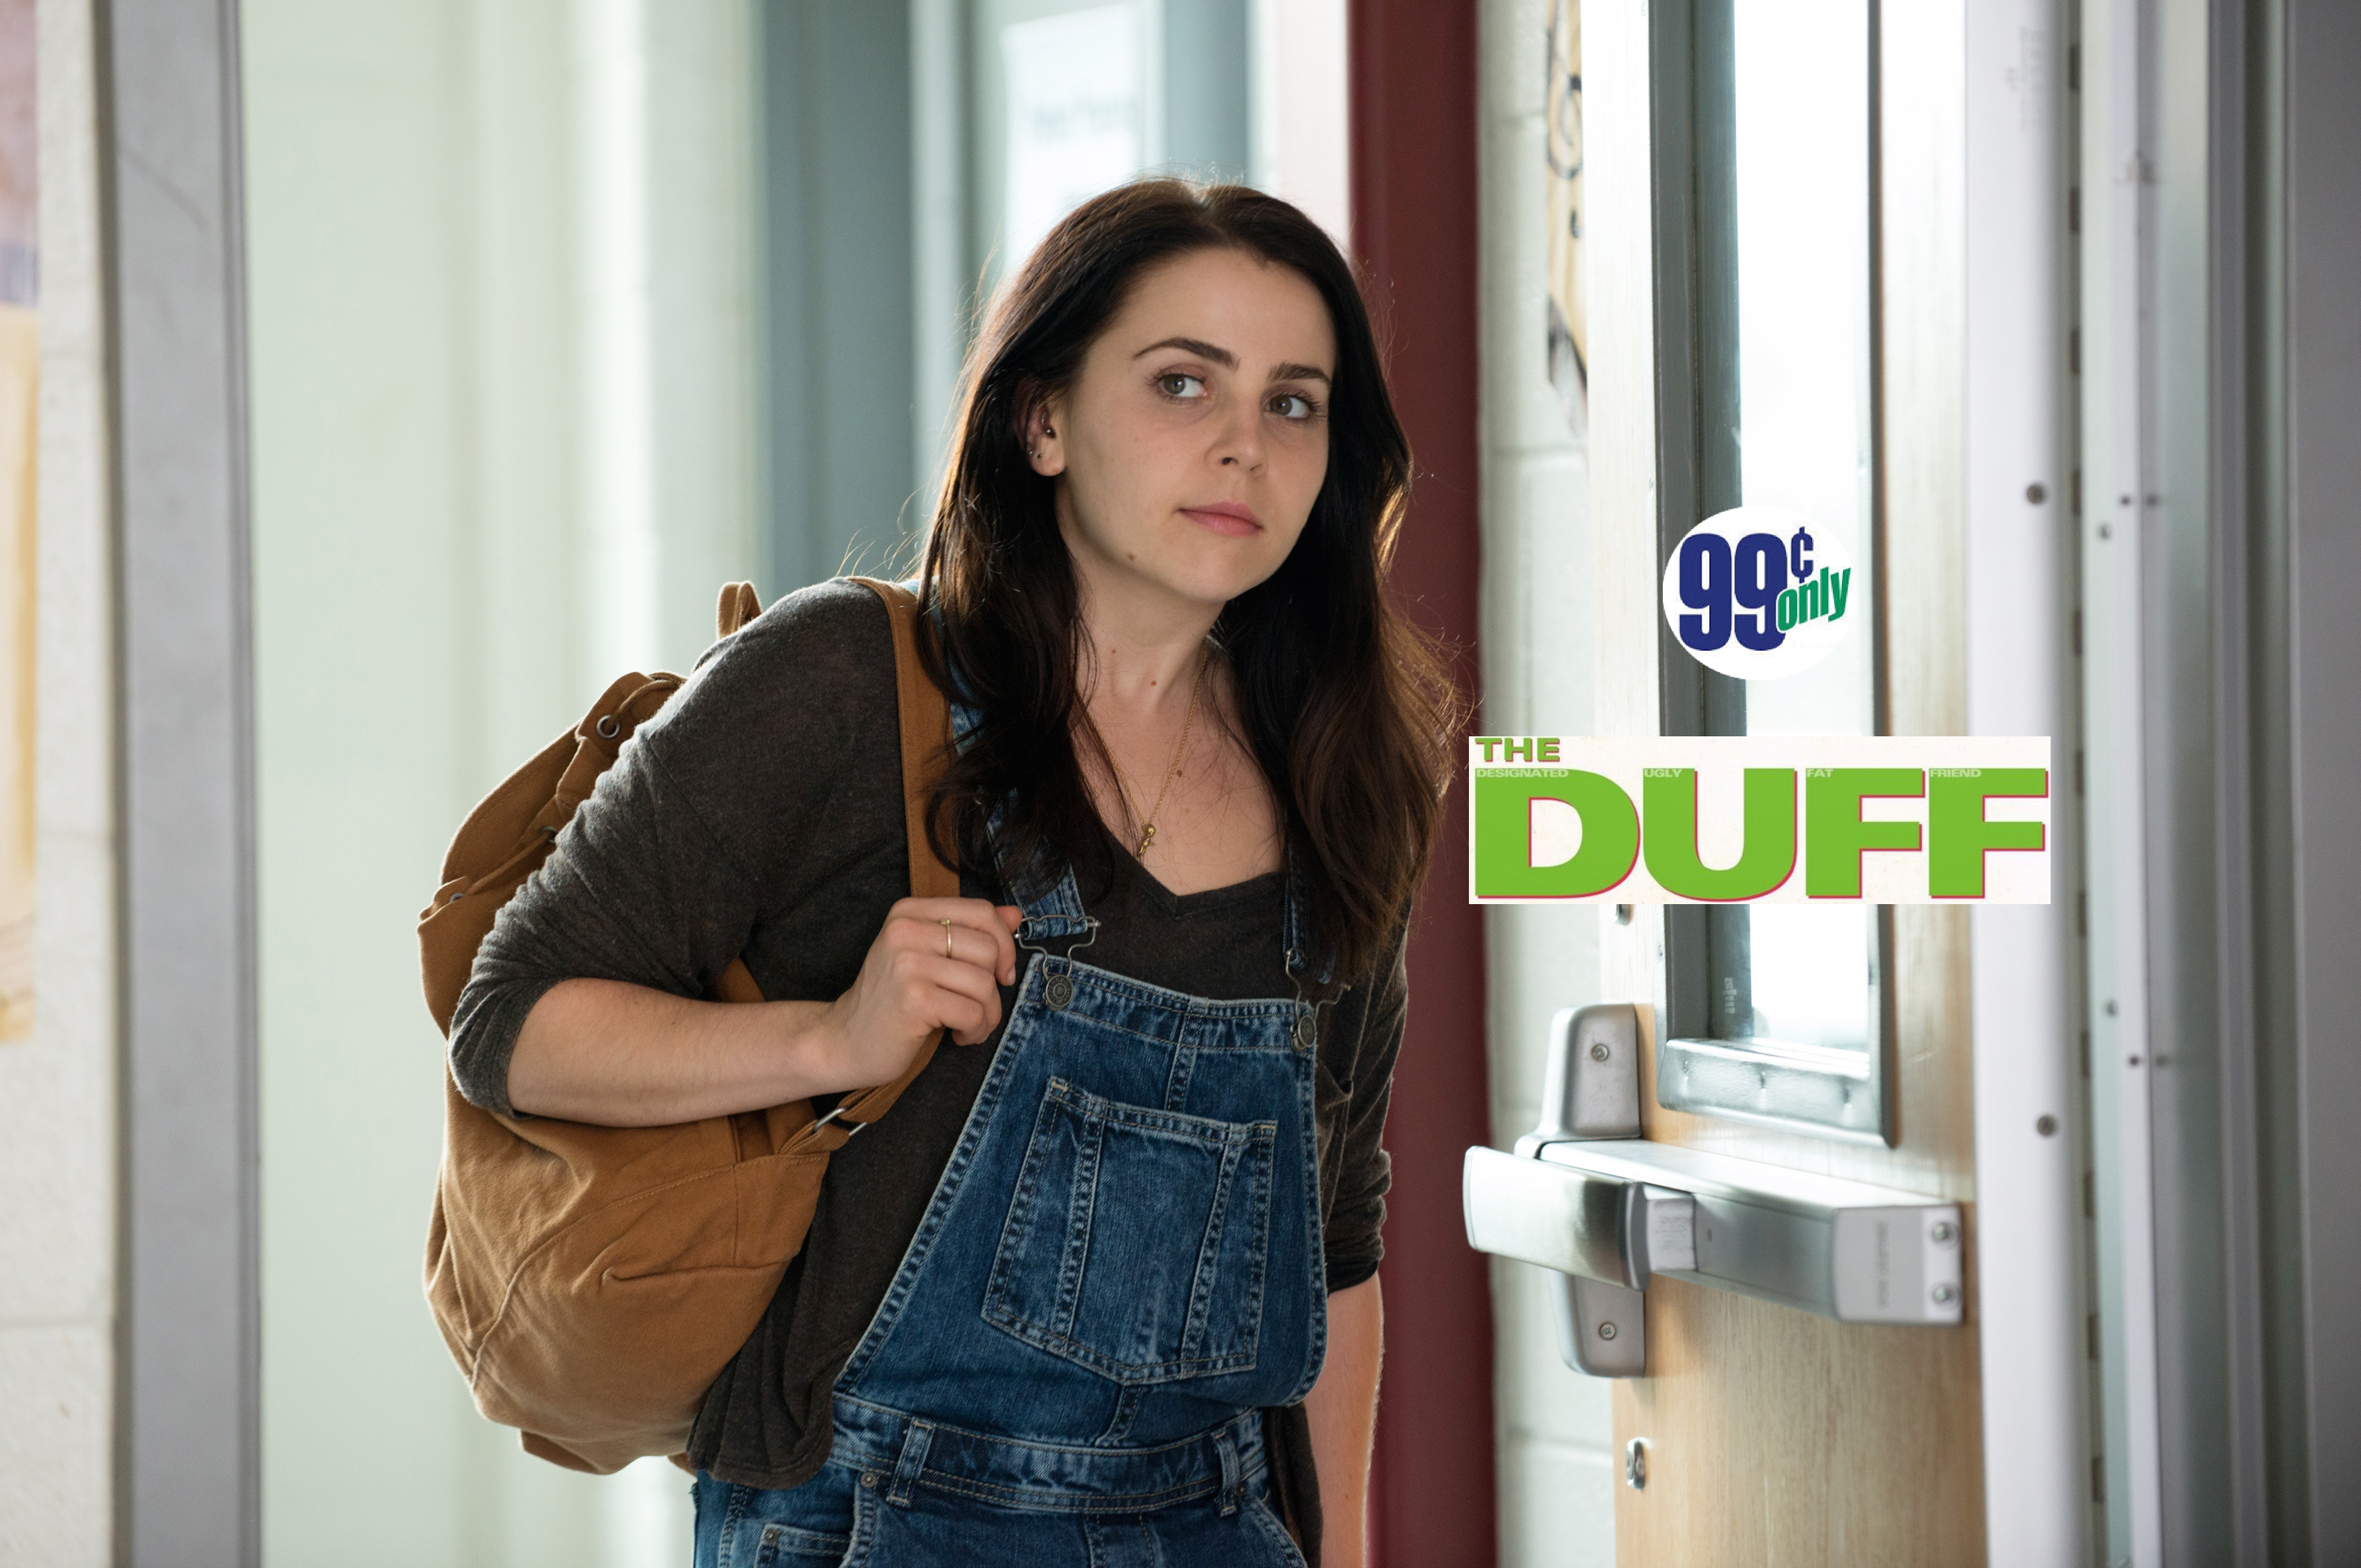 The itunes 99 cent movie rental of the week: ‘the duff’